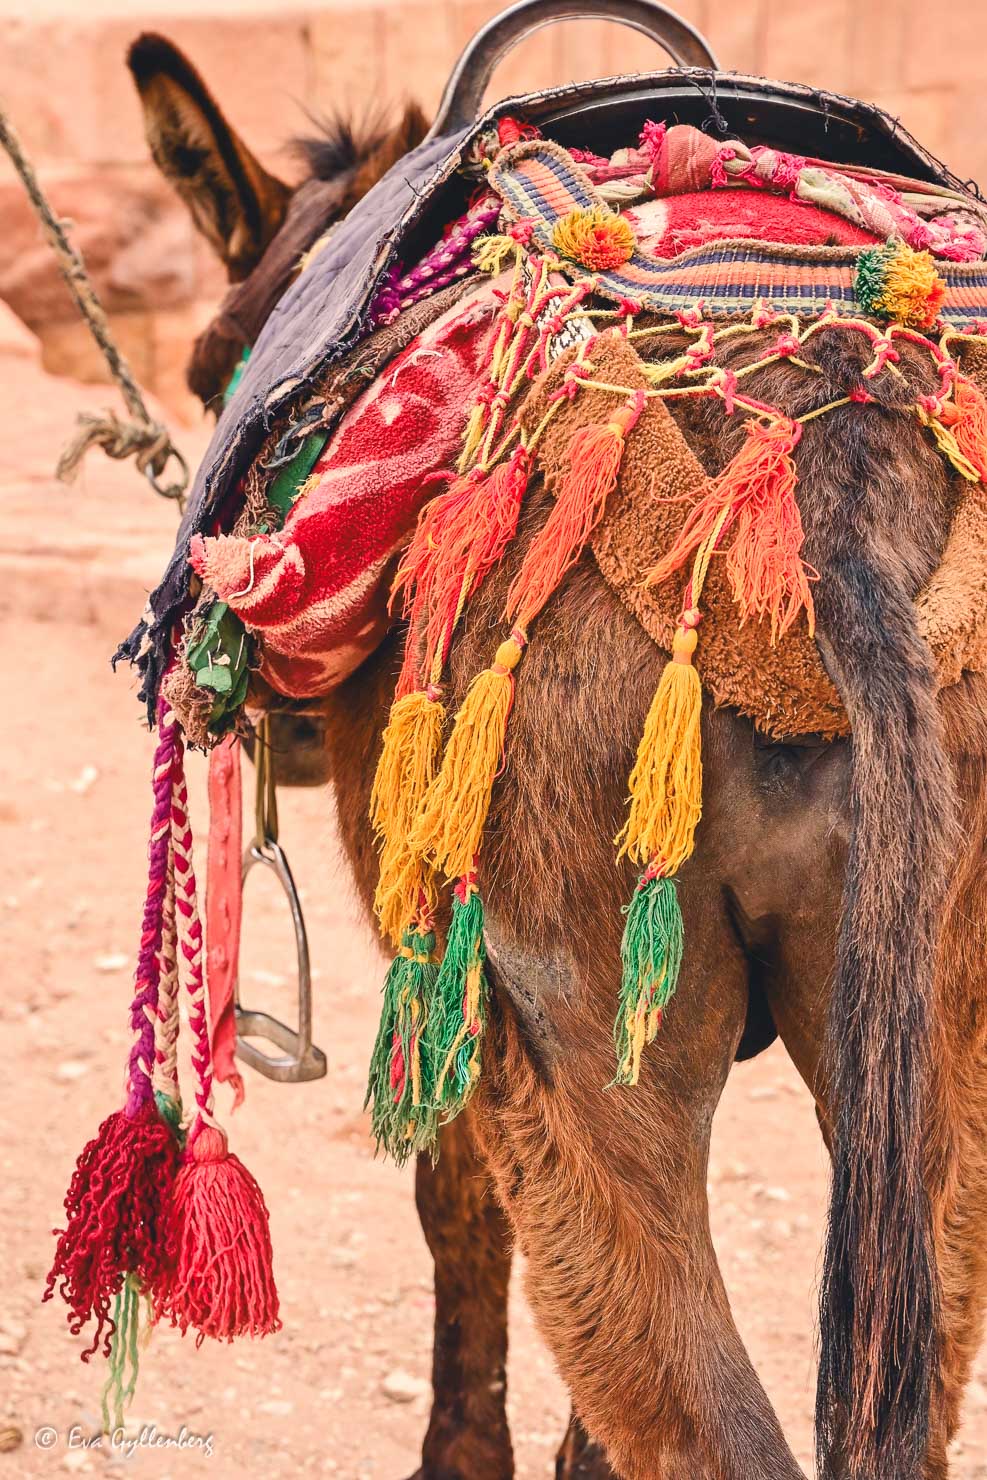 Donkey with colorful tassels in Petra